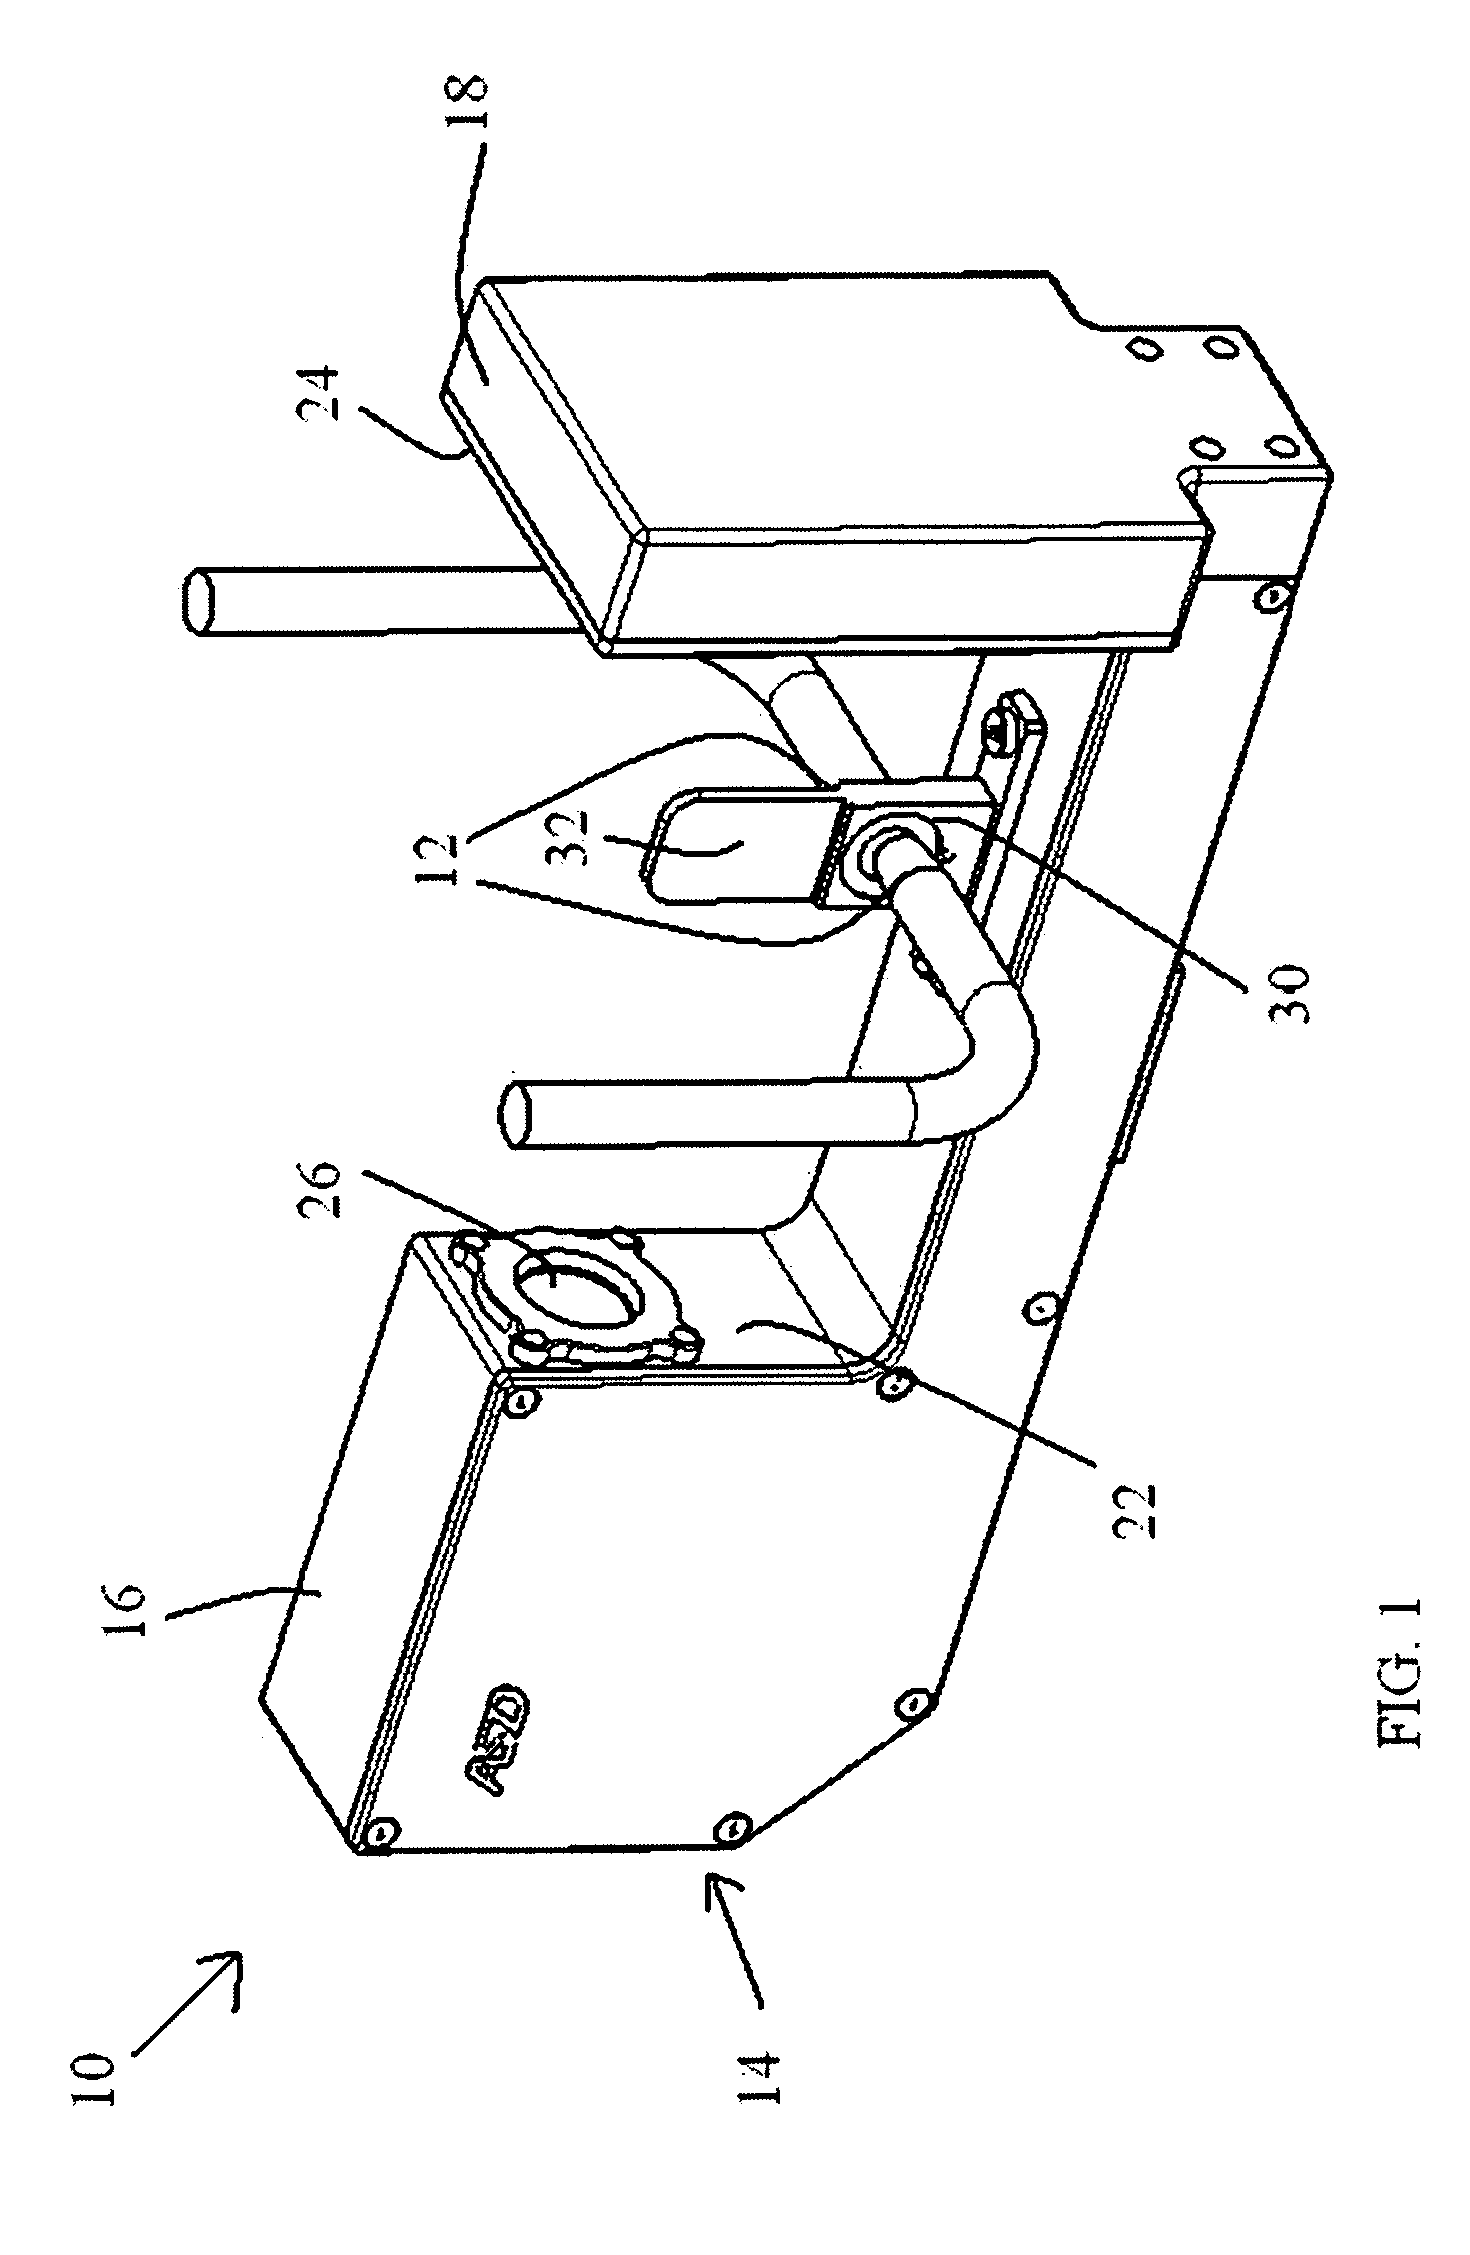 Method and Device for Measuring Resistance Spot Welding Electrode Tips While Connected to a Robotic Welder